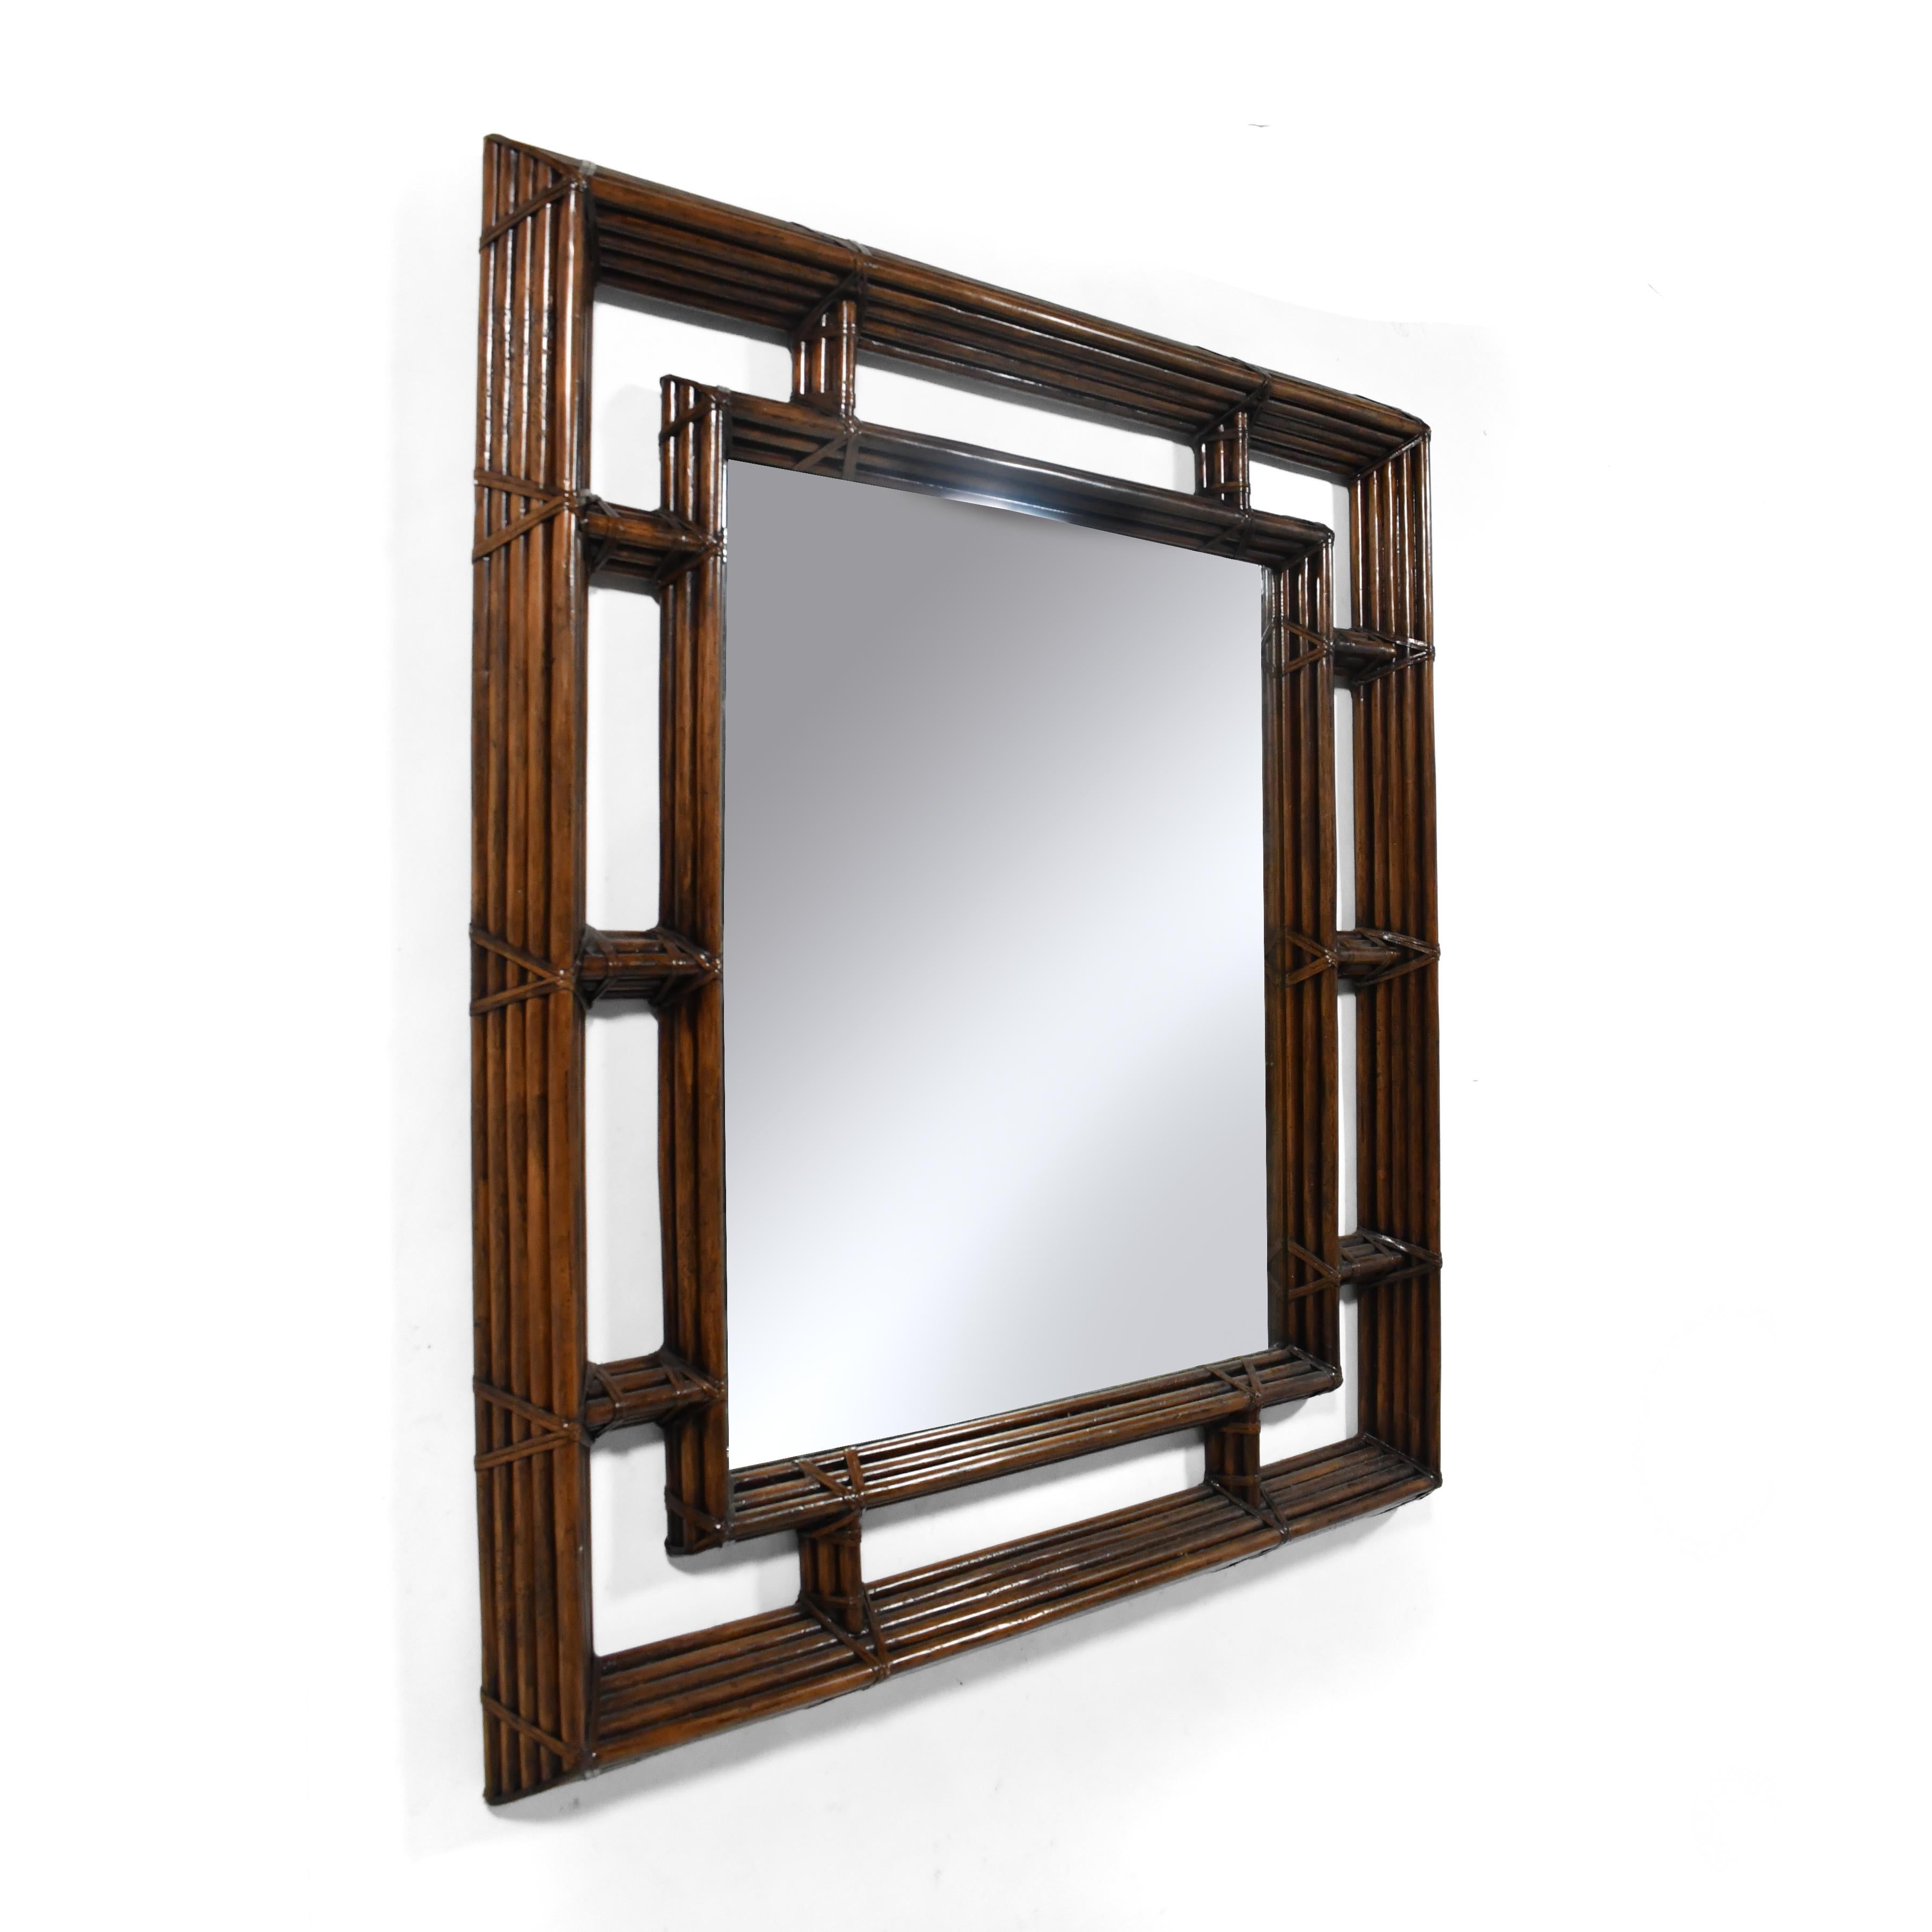 This large, impressive mirror by Henredon framed in multiple stacked bands of rattan has incredible presence and depth. The interior frame has five bands, the outer frame has nine. The rattan is bound, not in cane, but in rawhide leather– a